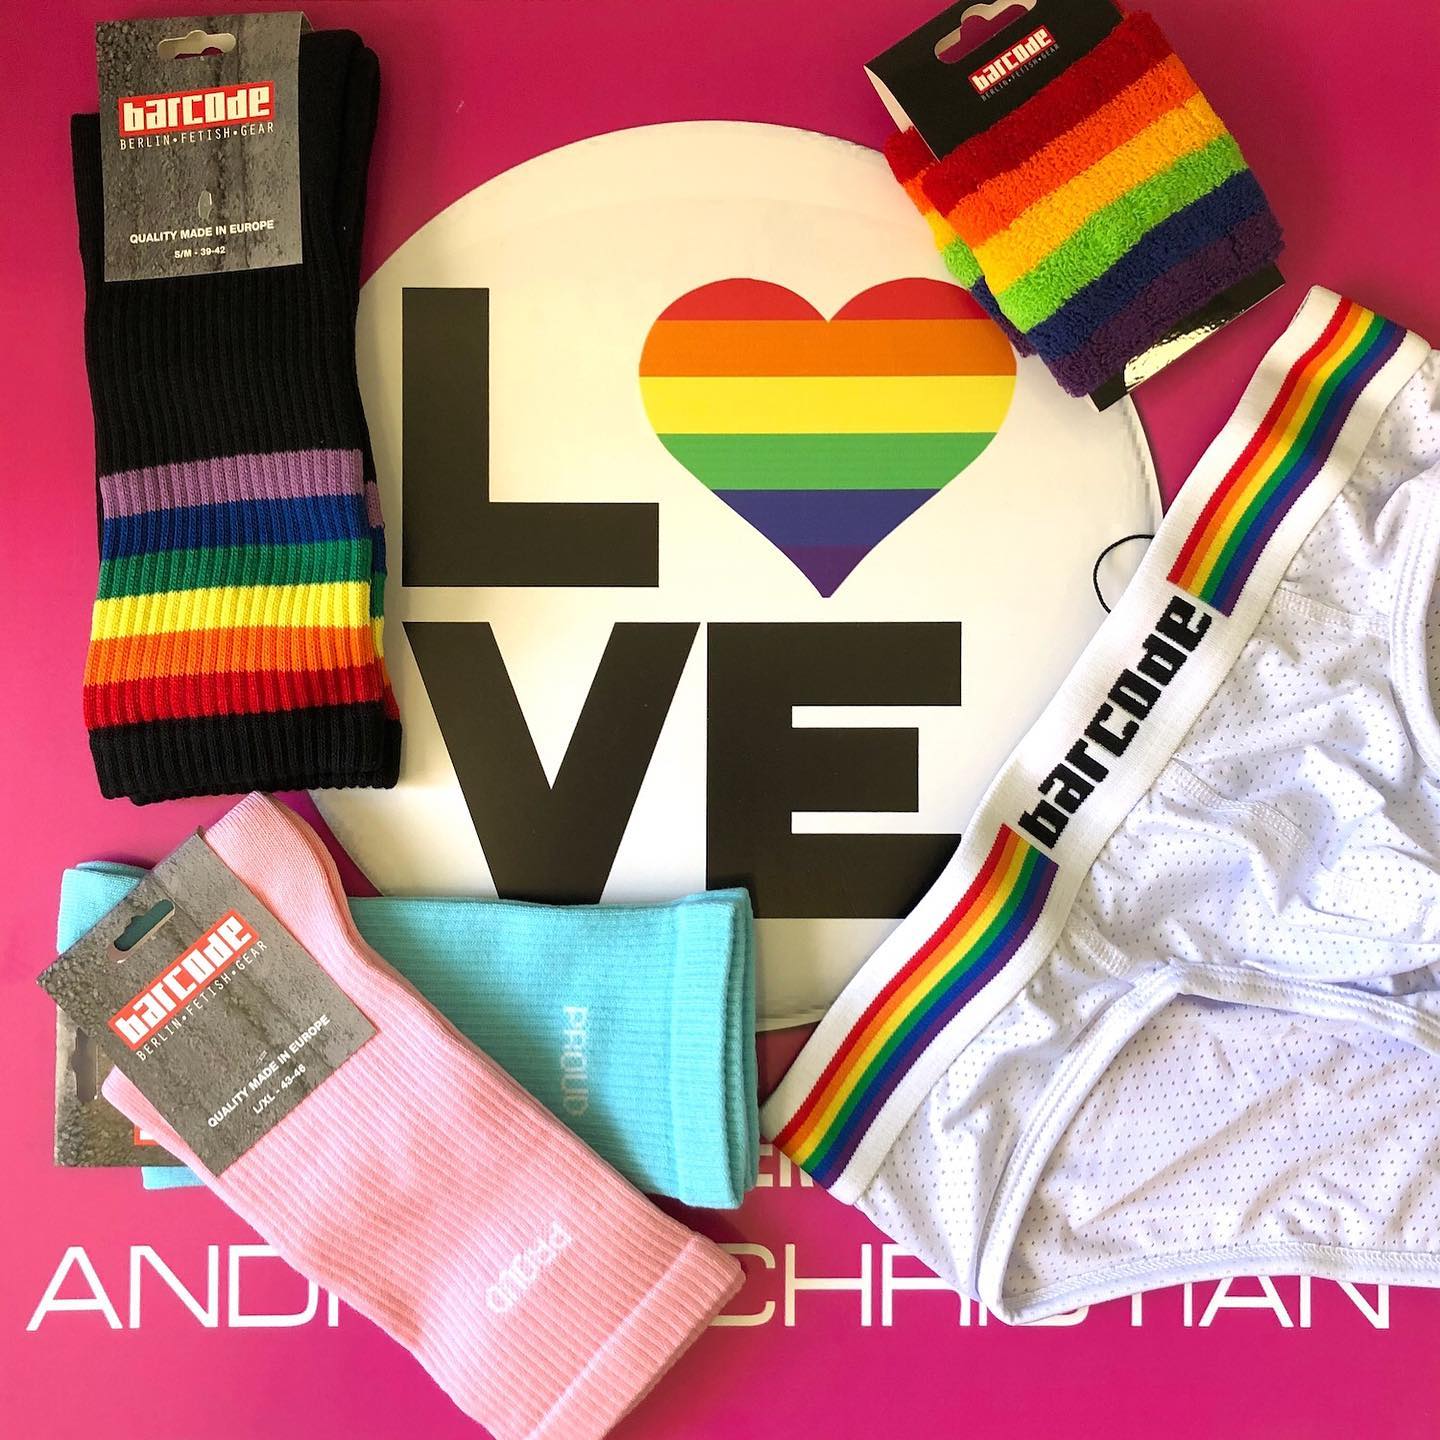 🌈🛍️ Our Pride Special shopping guide is live on the shop! 🛍️🌈 Discover a wide variety of items, including underwear, socks, tops, and accessories - perfect for any Pride event worldwide! 🌎 Don't miss out on this opportunity to show your support for the LGBTQ+ community in style! 💜💙💚💛🧡❤️
_____
menandunderwear.com/shop/pride